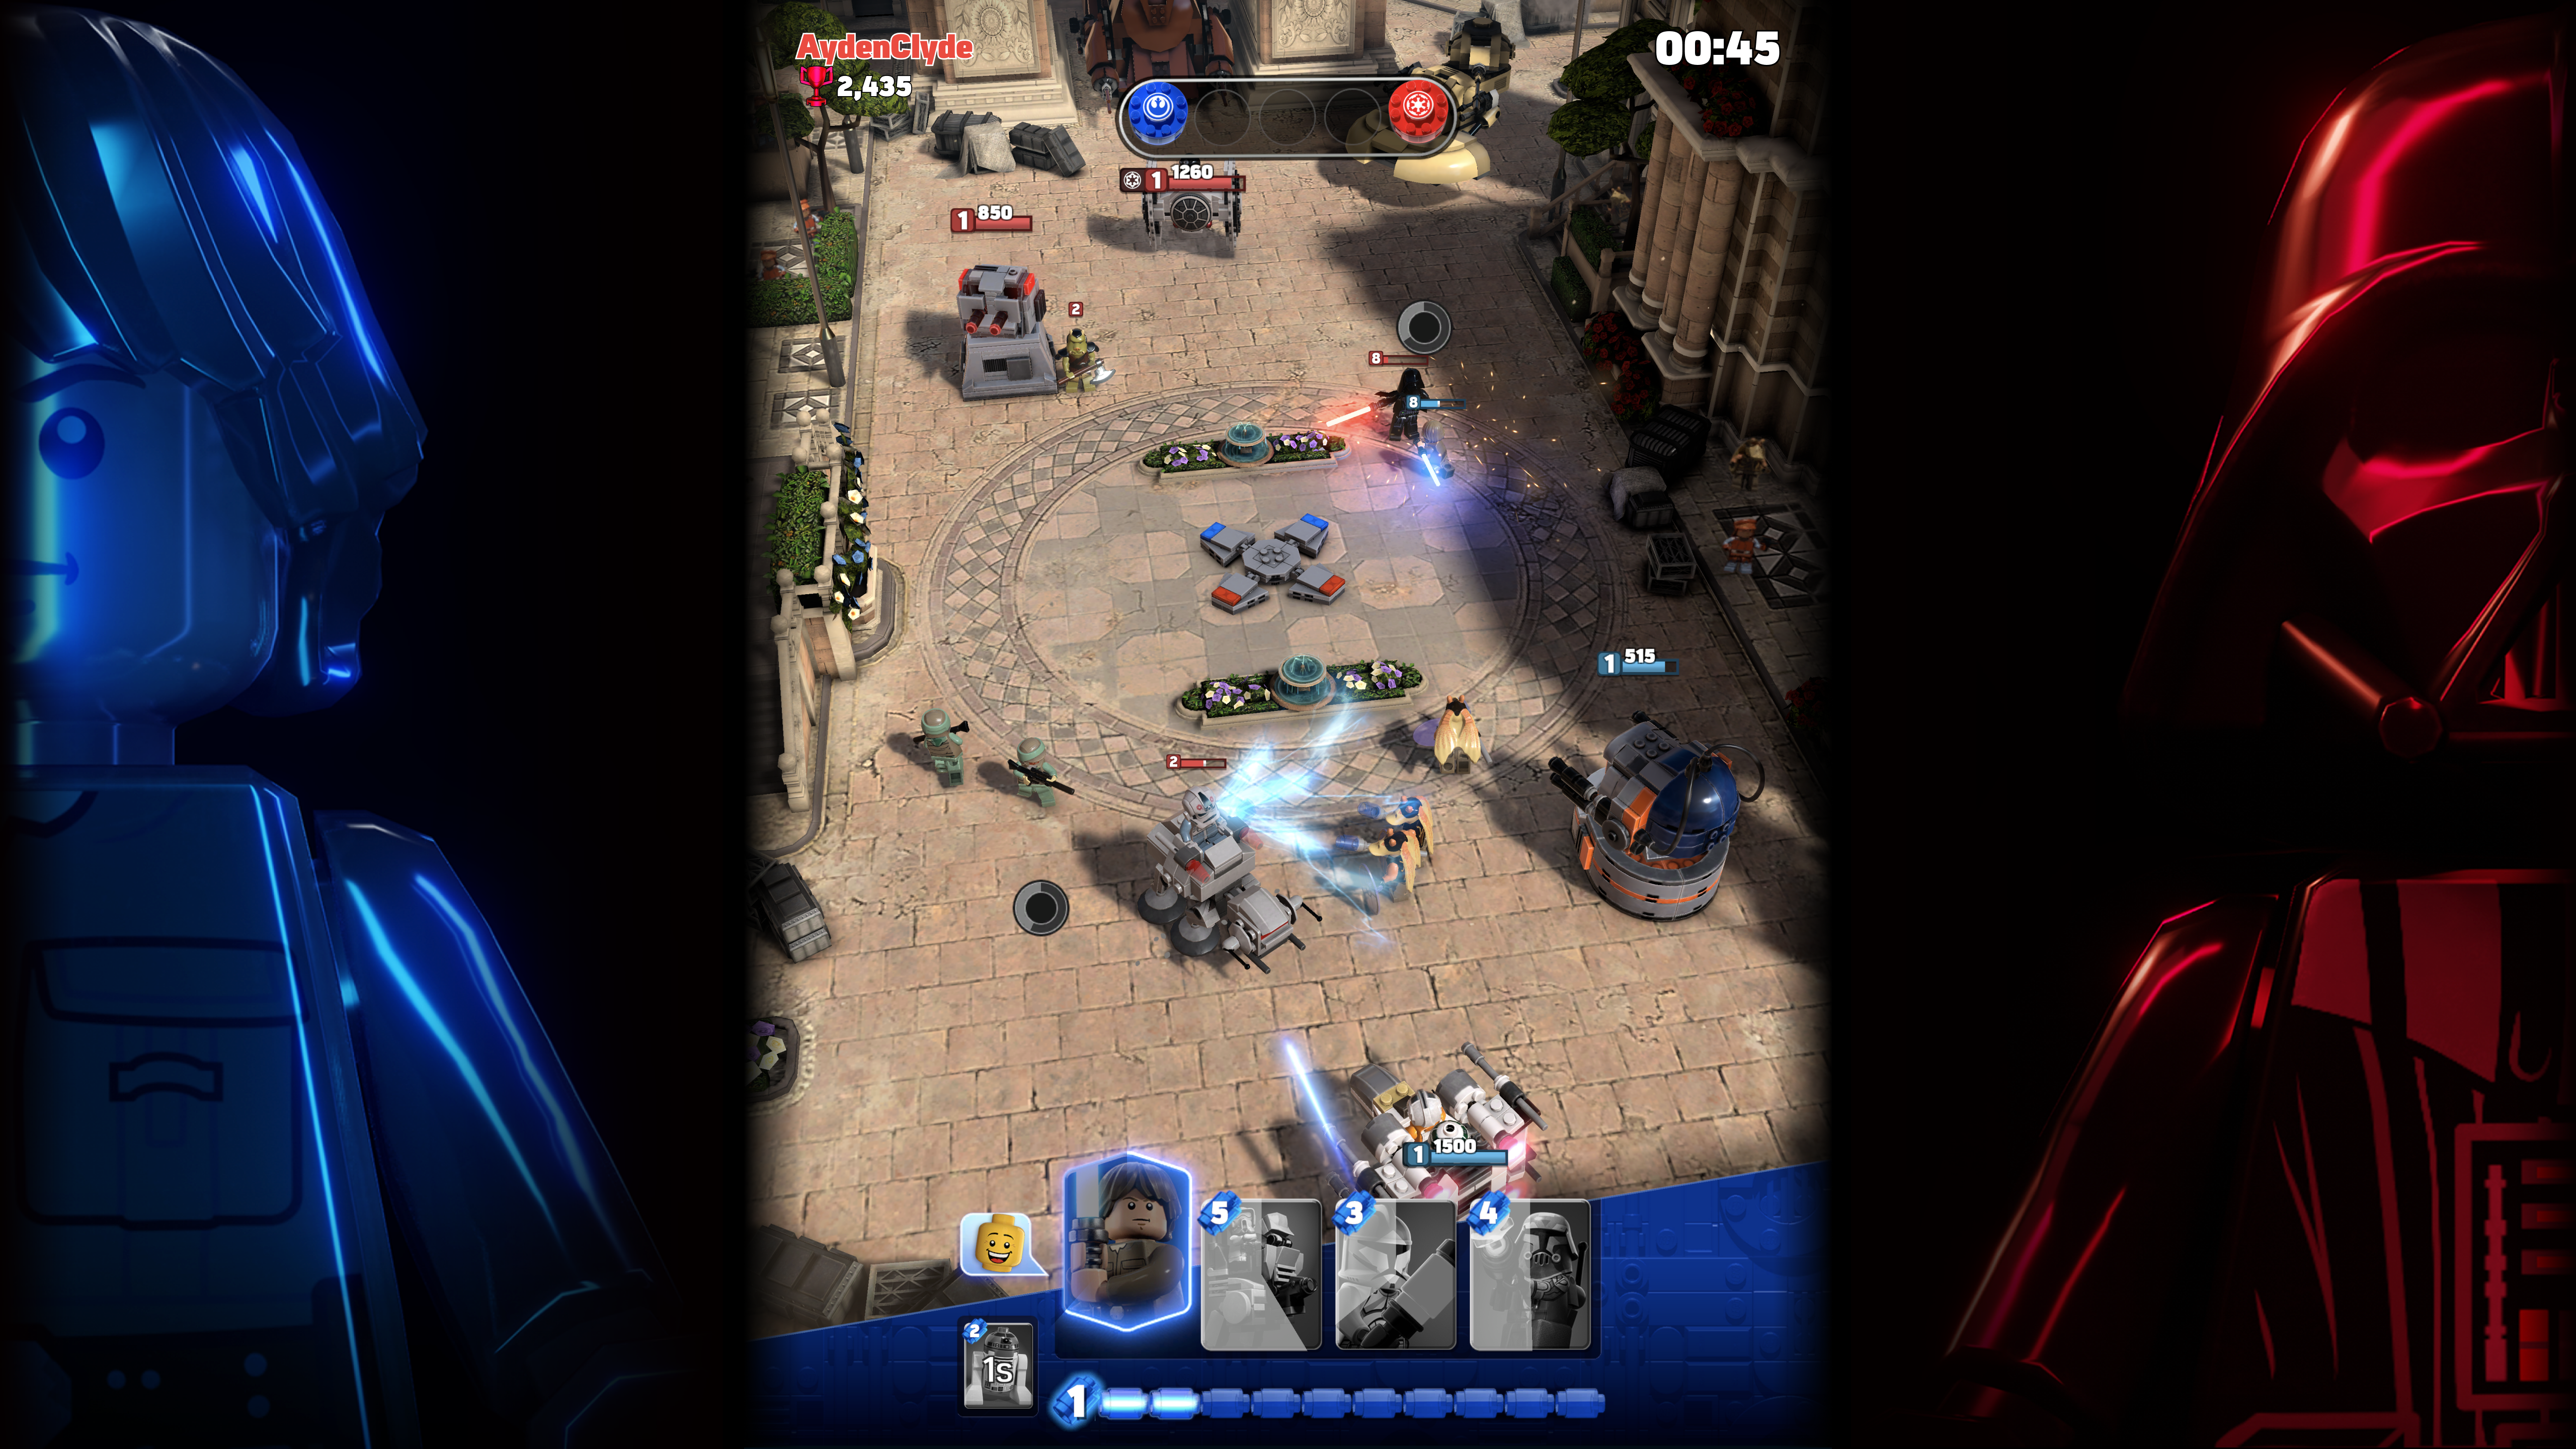 ‘LEGO Star Wars Battles’ from TT Games and Warner Brothers Is Coming Soon to Apple Arcade Featuring Characters from All Star Wars Eras